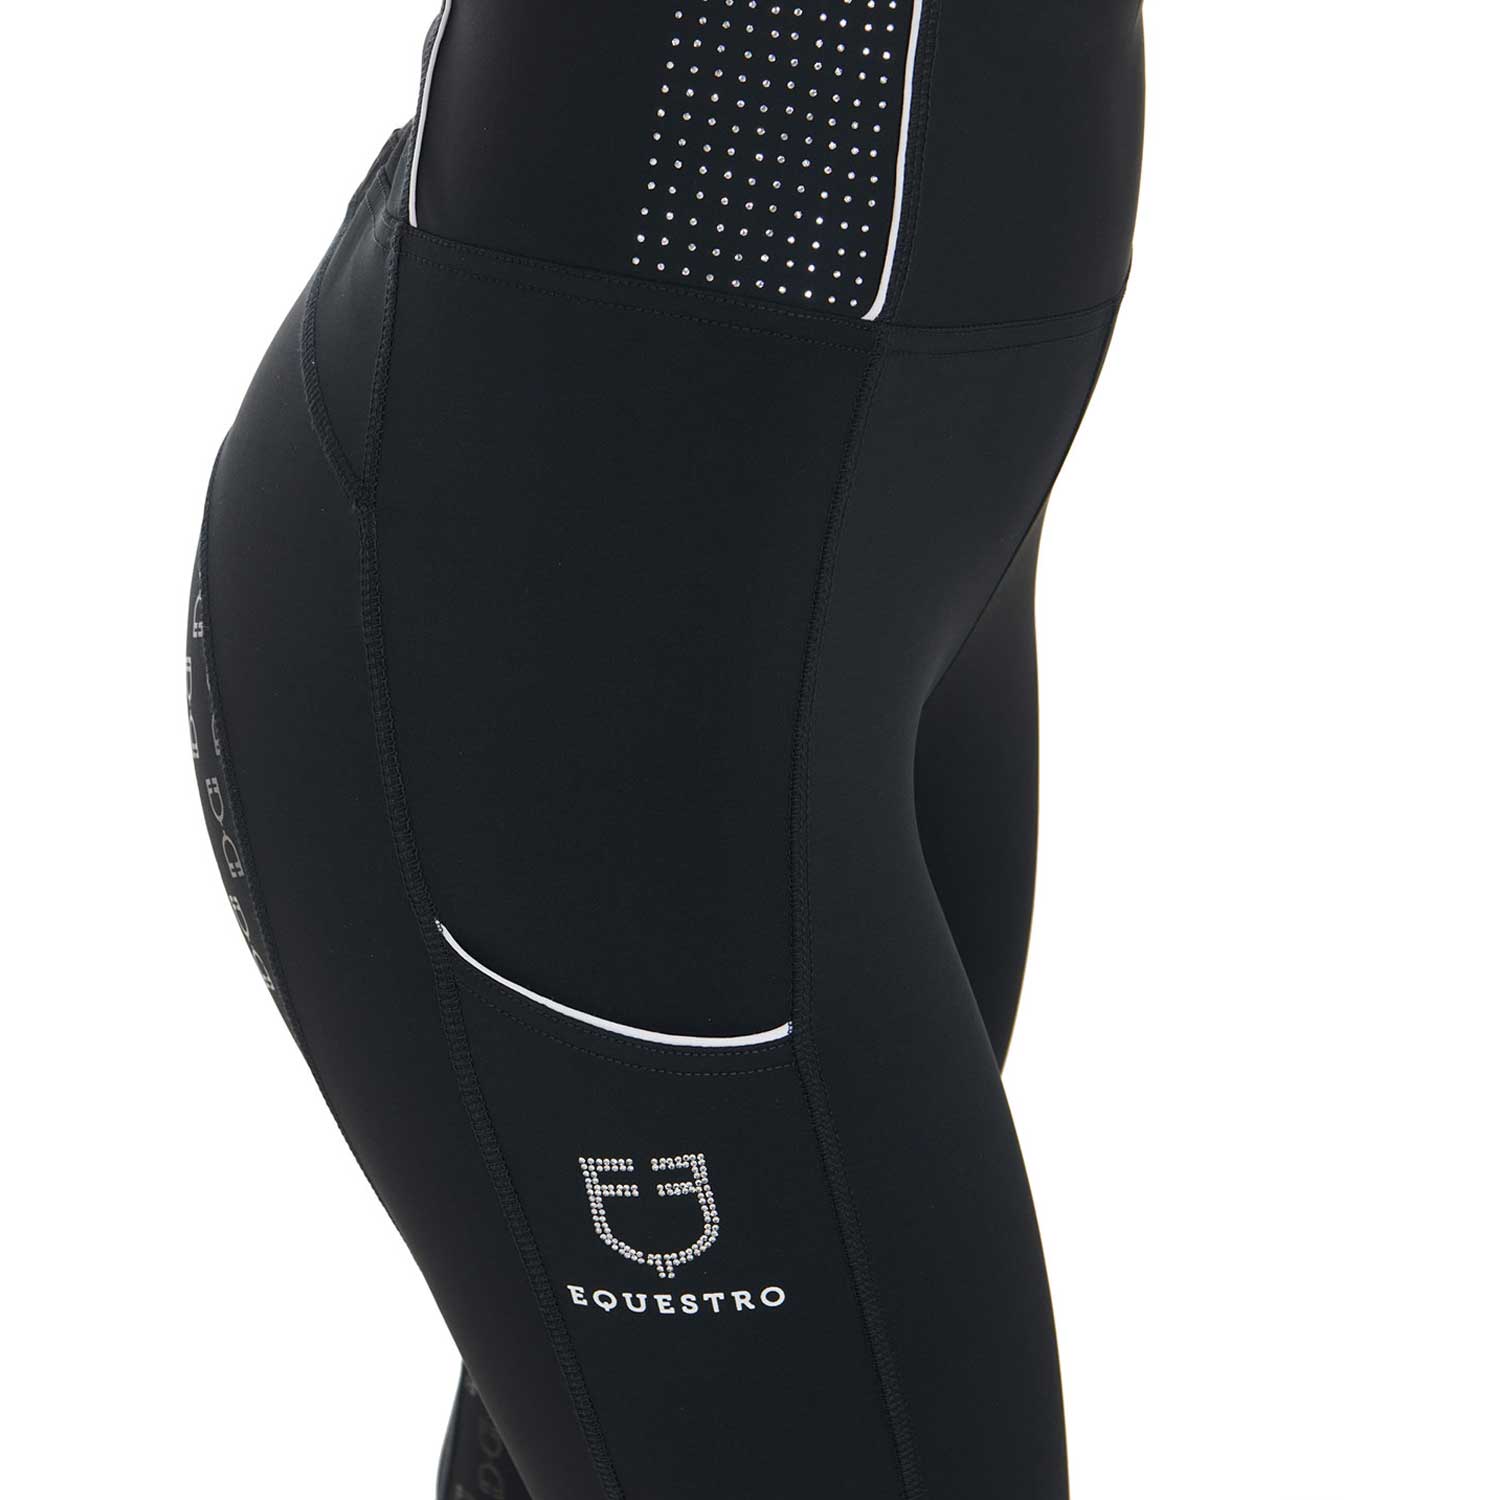 Best high waist riding tights for horse riding